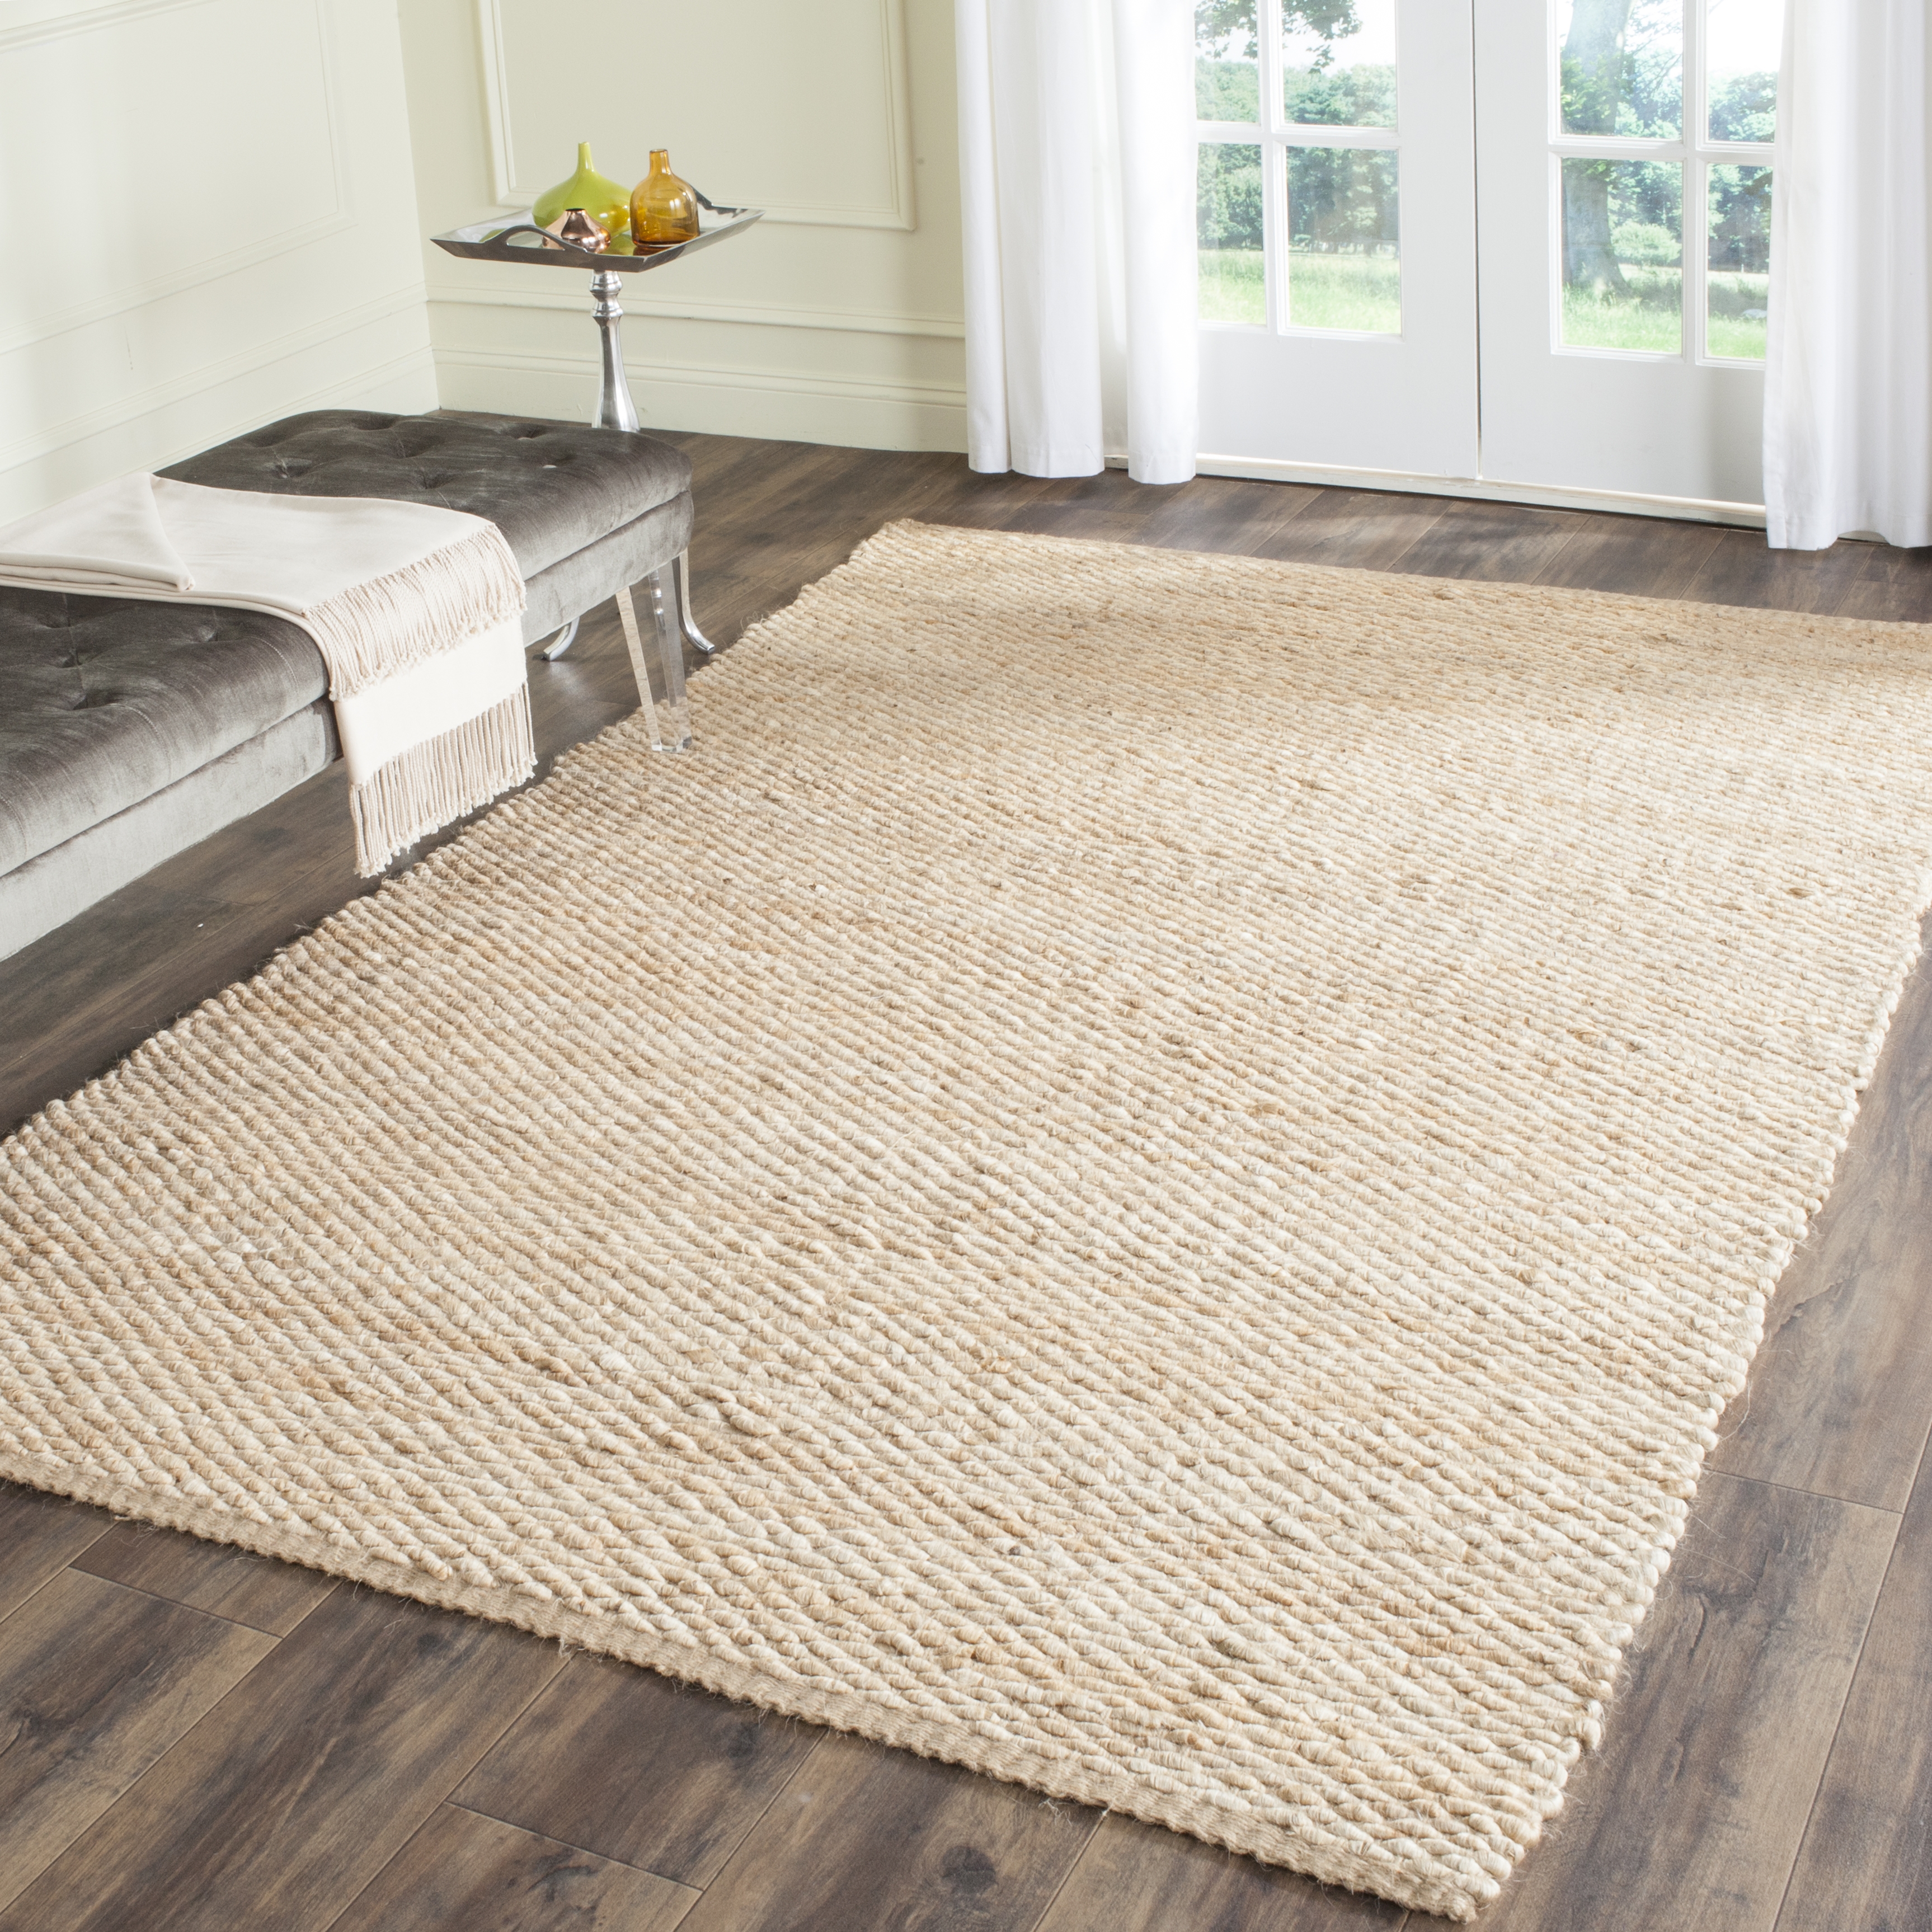 Arlo Home Hand Woven Area Rug, NF459A, Natural,  5' X 8' - Image 1